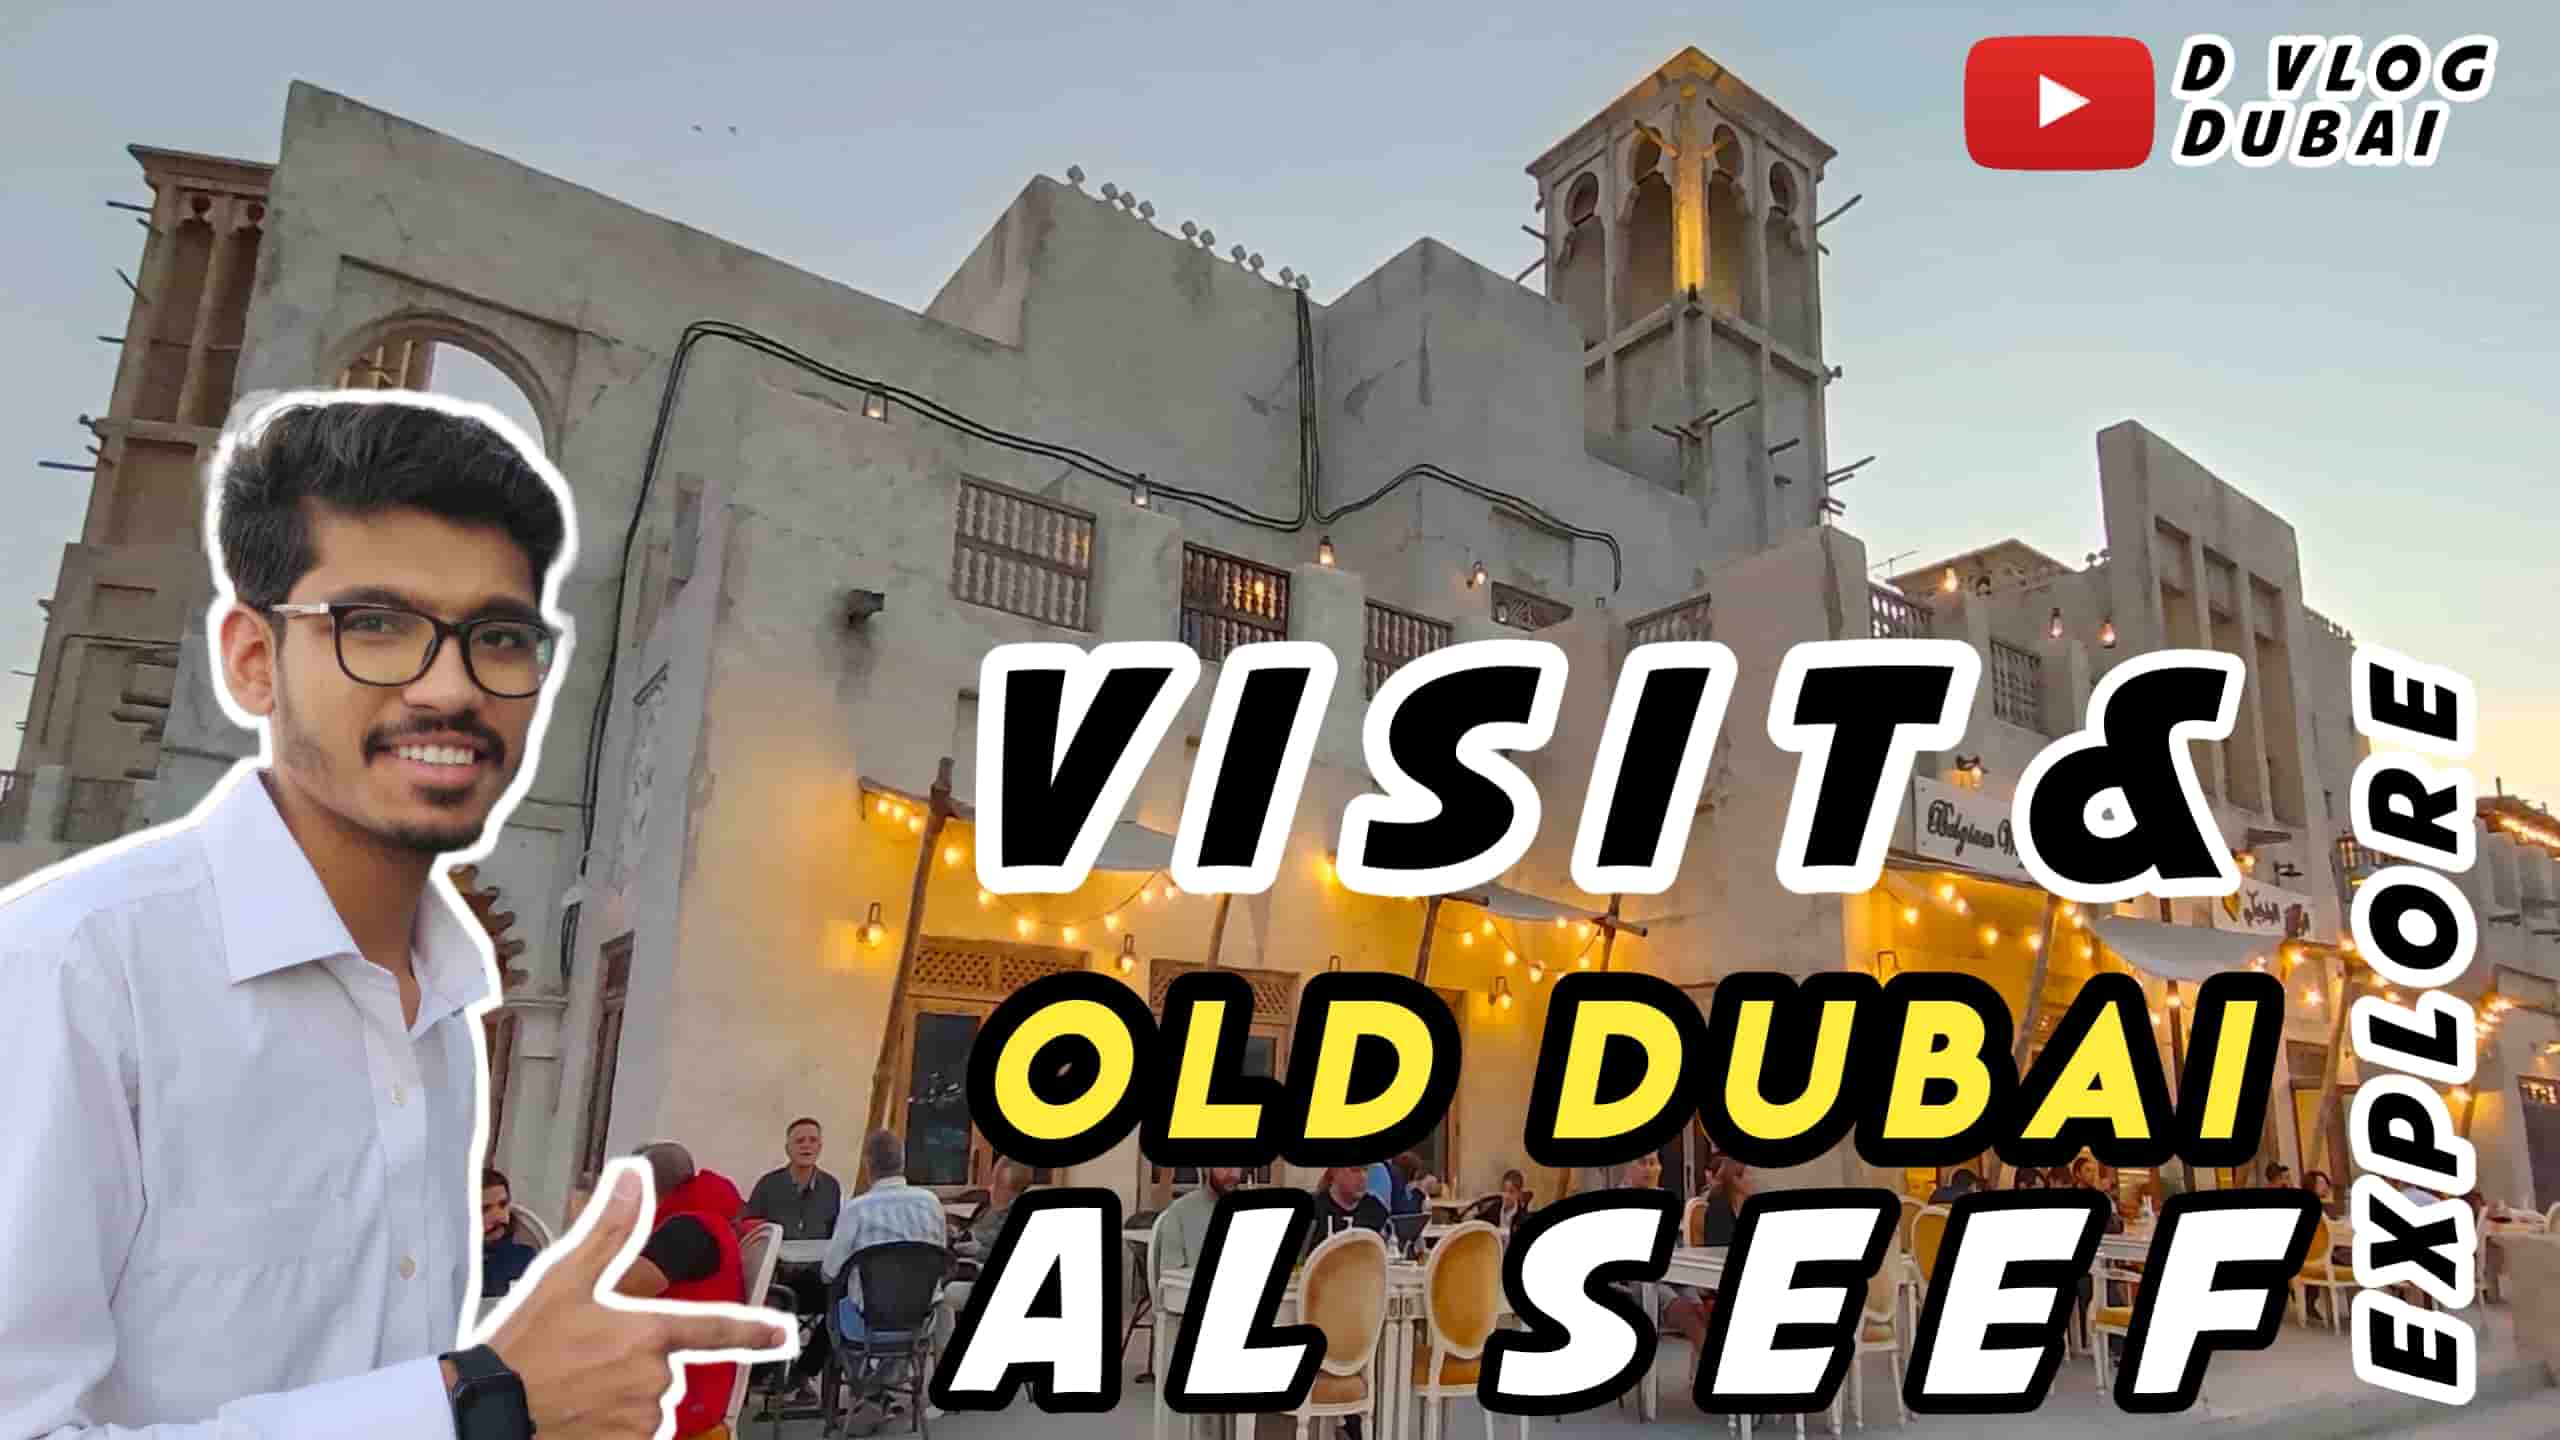 Al Seef Dubai area Visit and enjoy one of the worlf best place by D Vlog Dubai